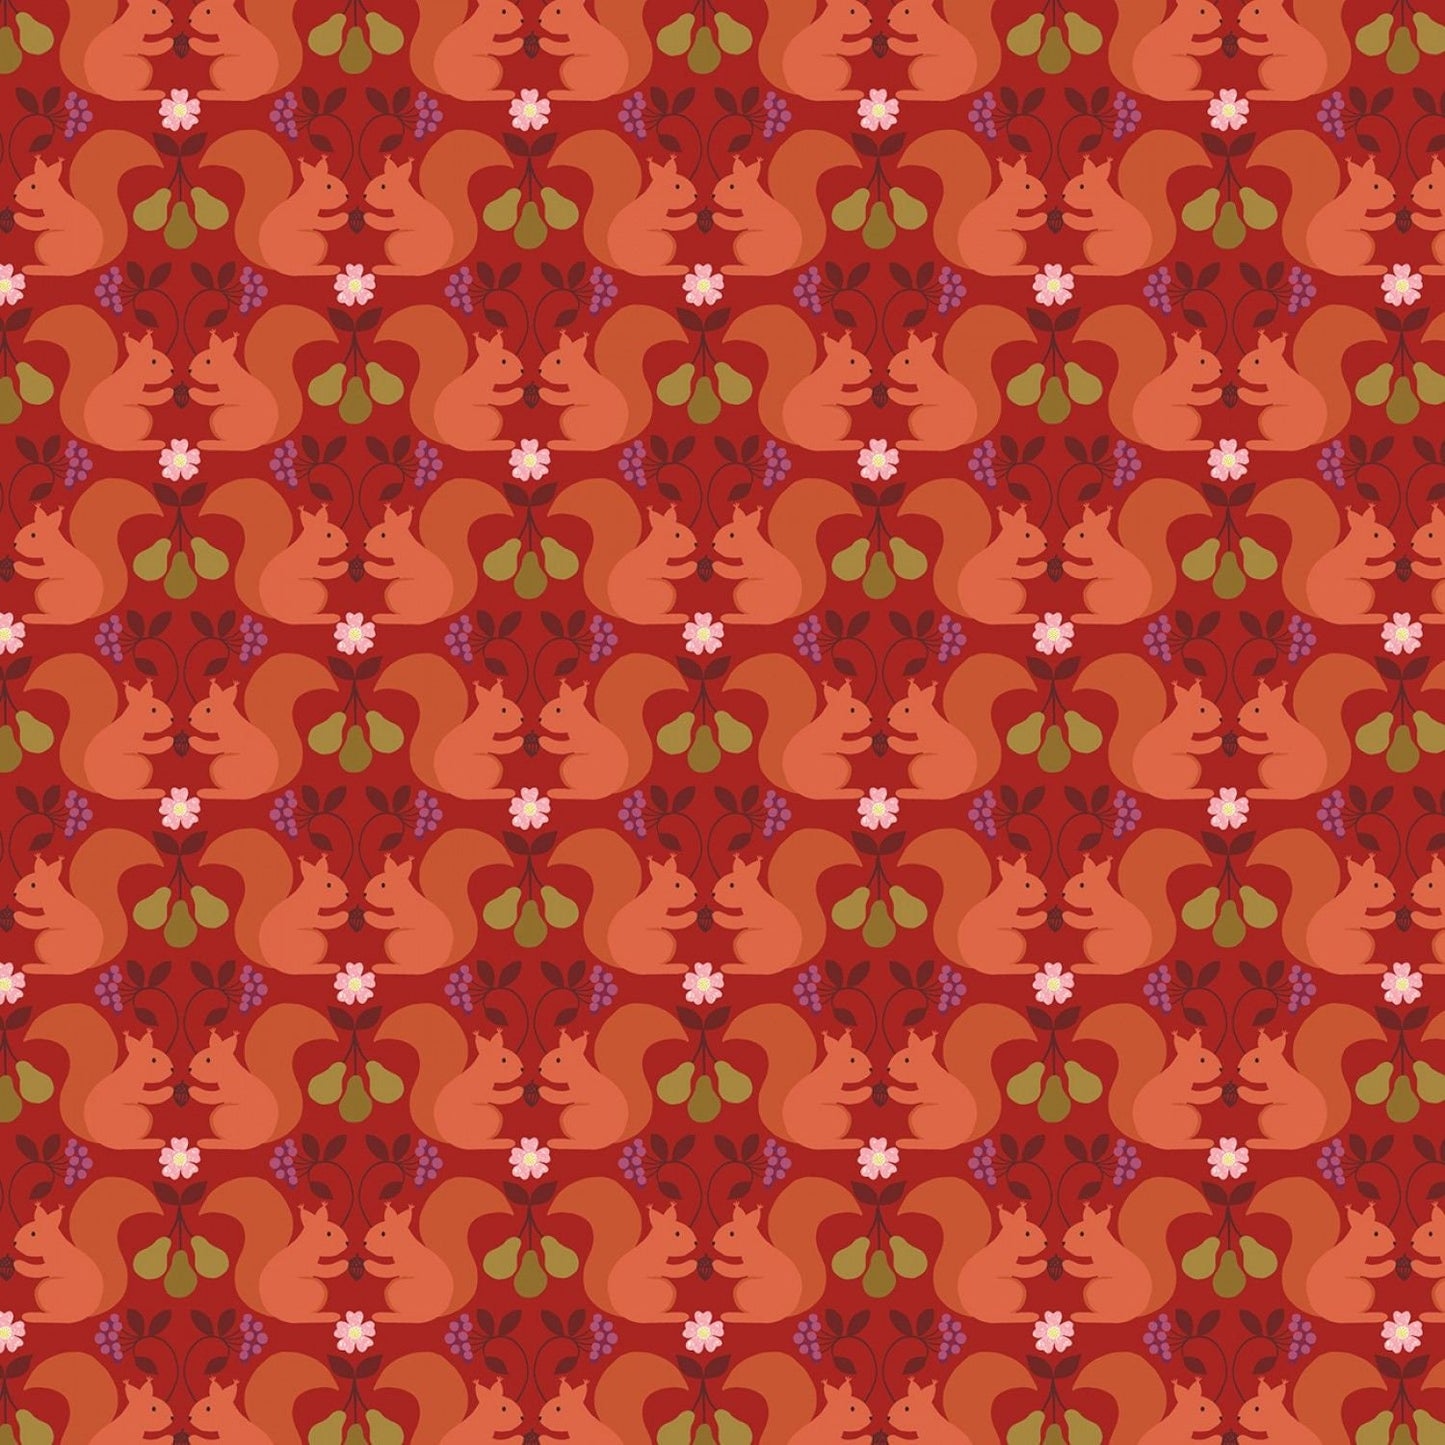 The Orchard Red Squirrels on Red A499.2 Cotton Woven Fabric